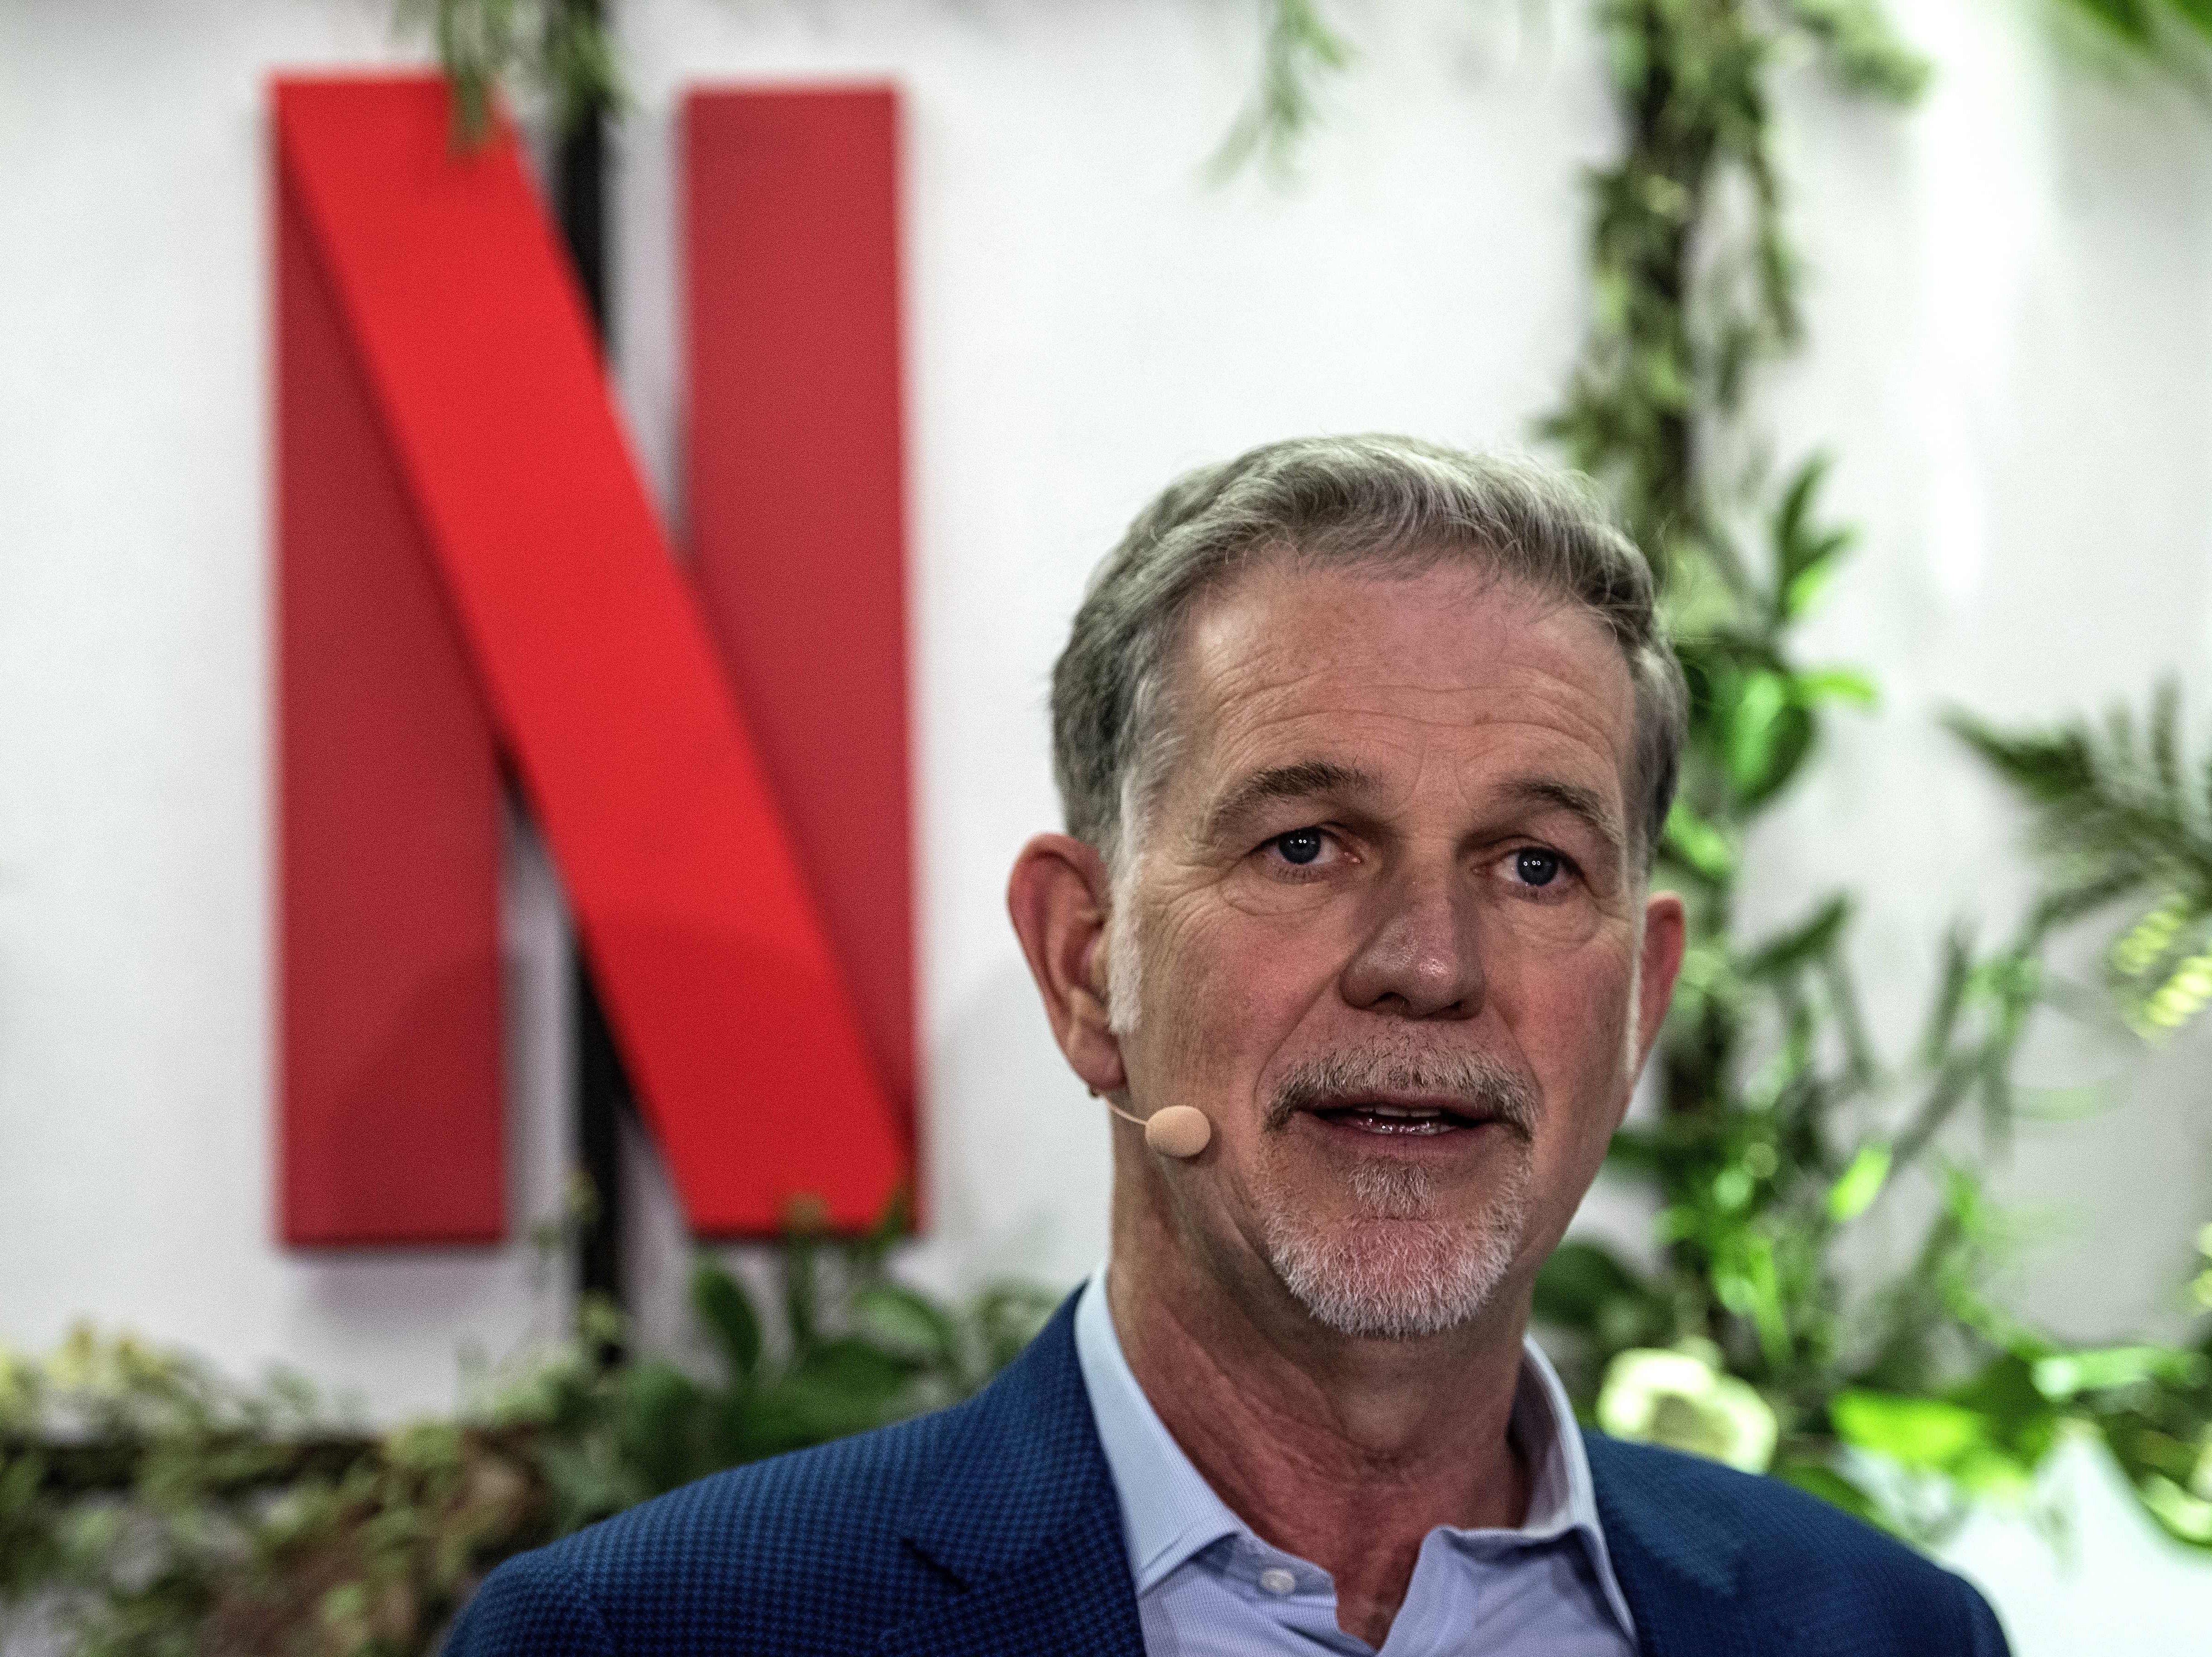 Co-founder and director of Netflix Reed Hastings delivers a speech as he inaugurates the new offices of Netflix France, in Paris on 17 January, 2020